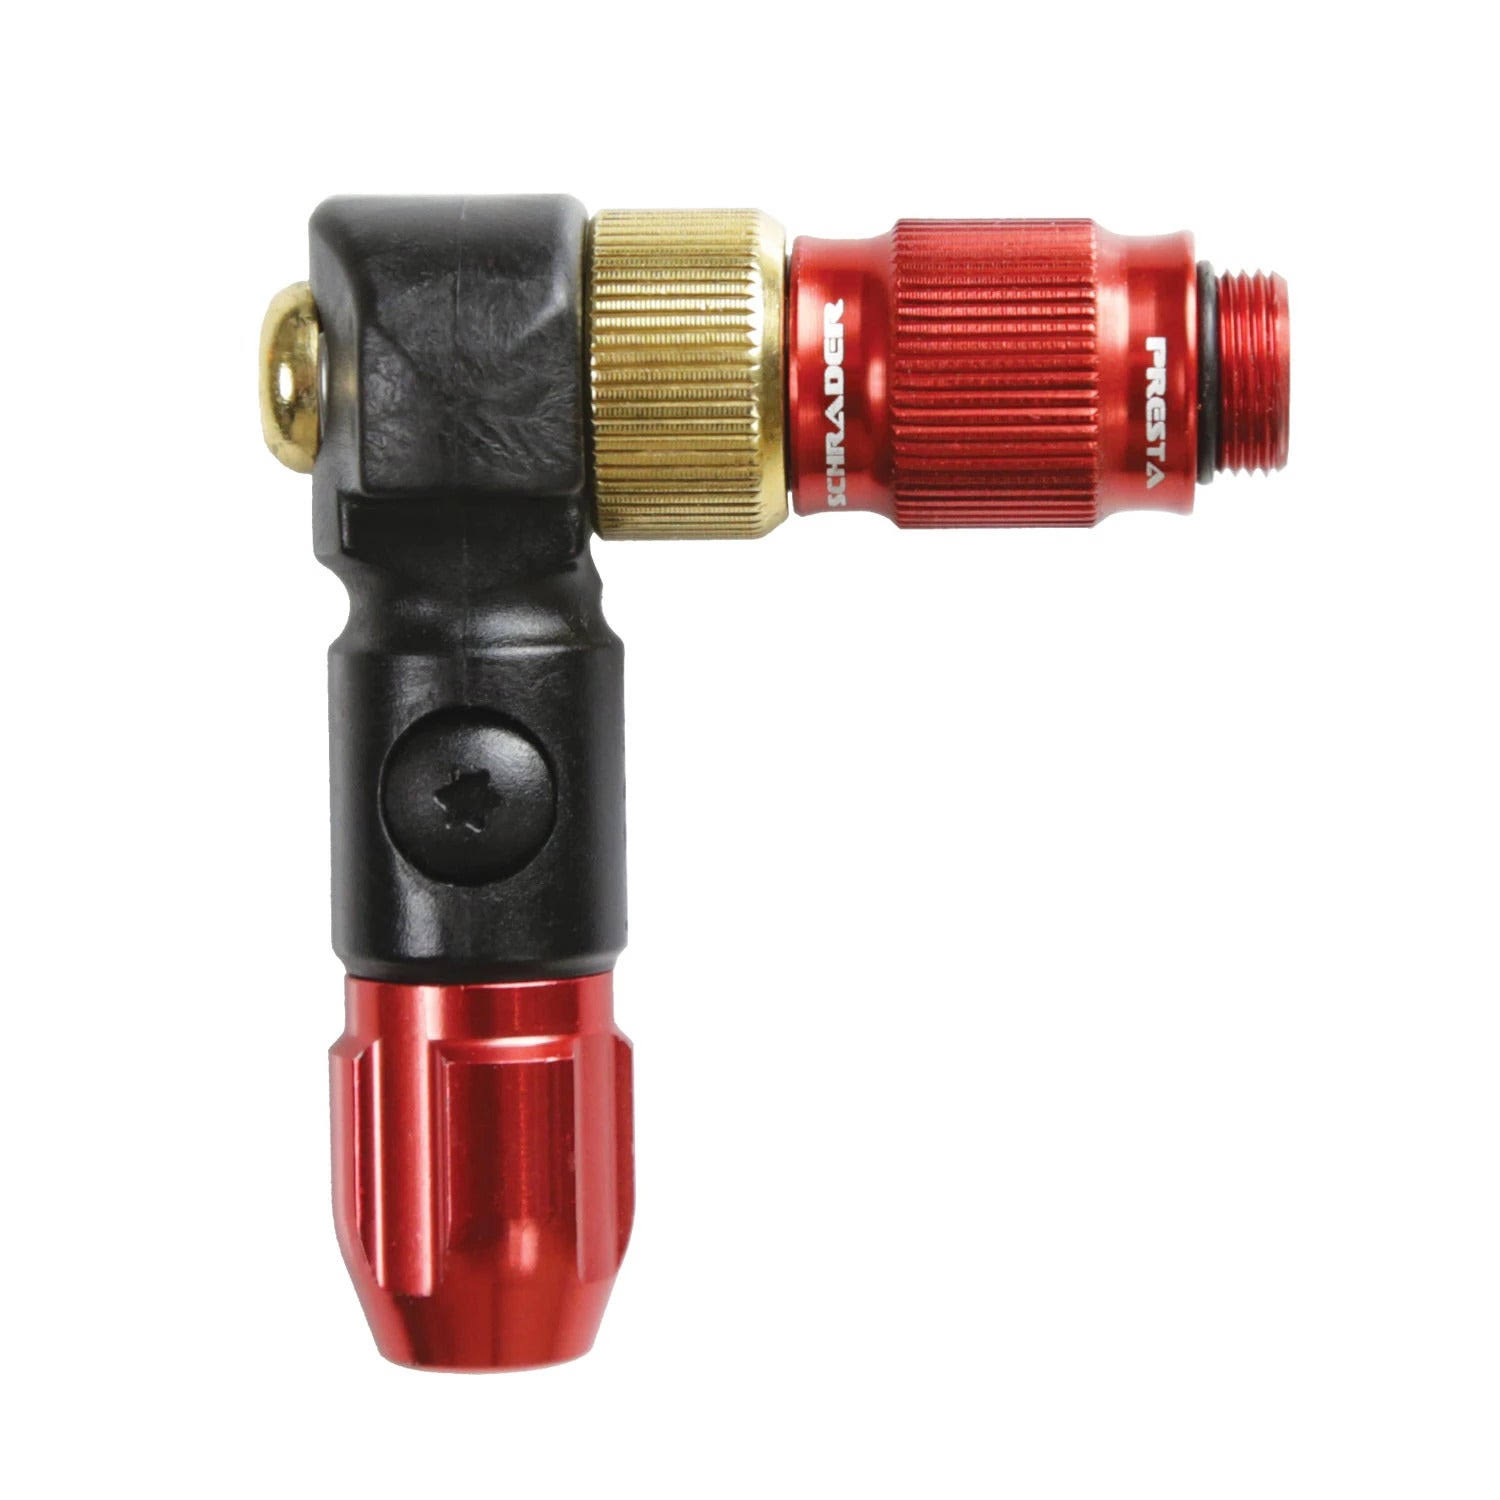 Lezyne ABS1 Bicycle Pro HP Pump Chuck Head - Red